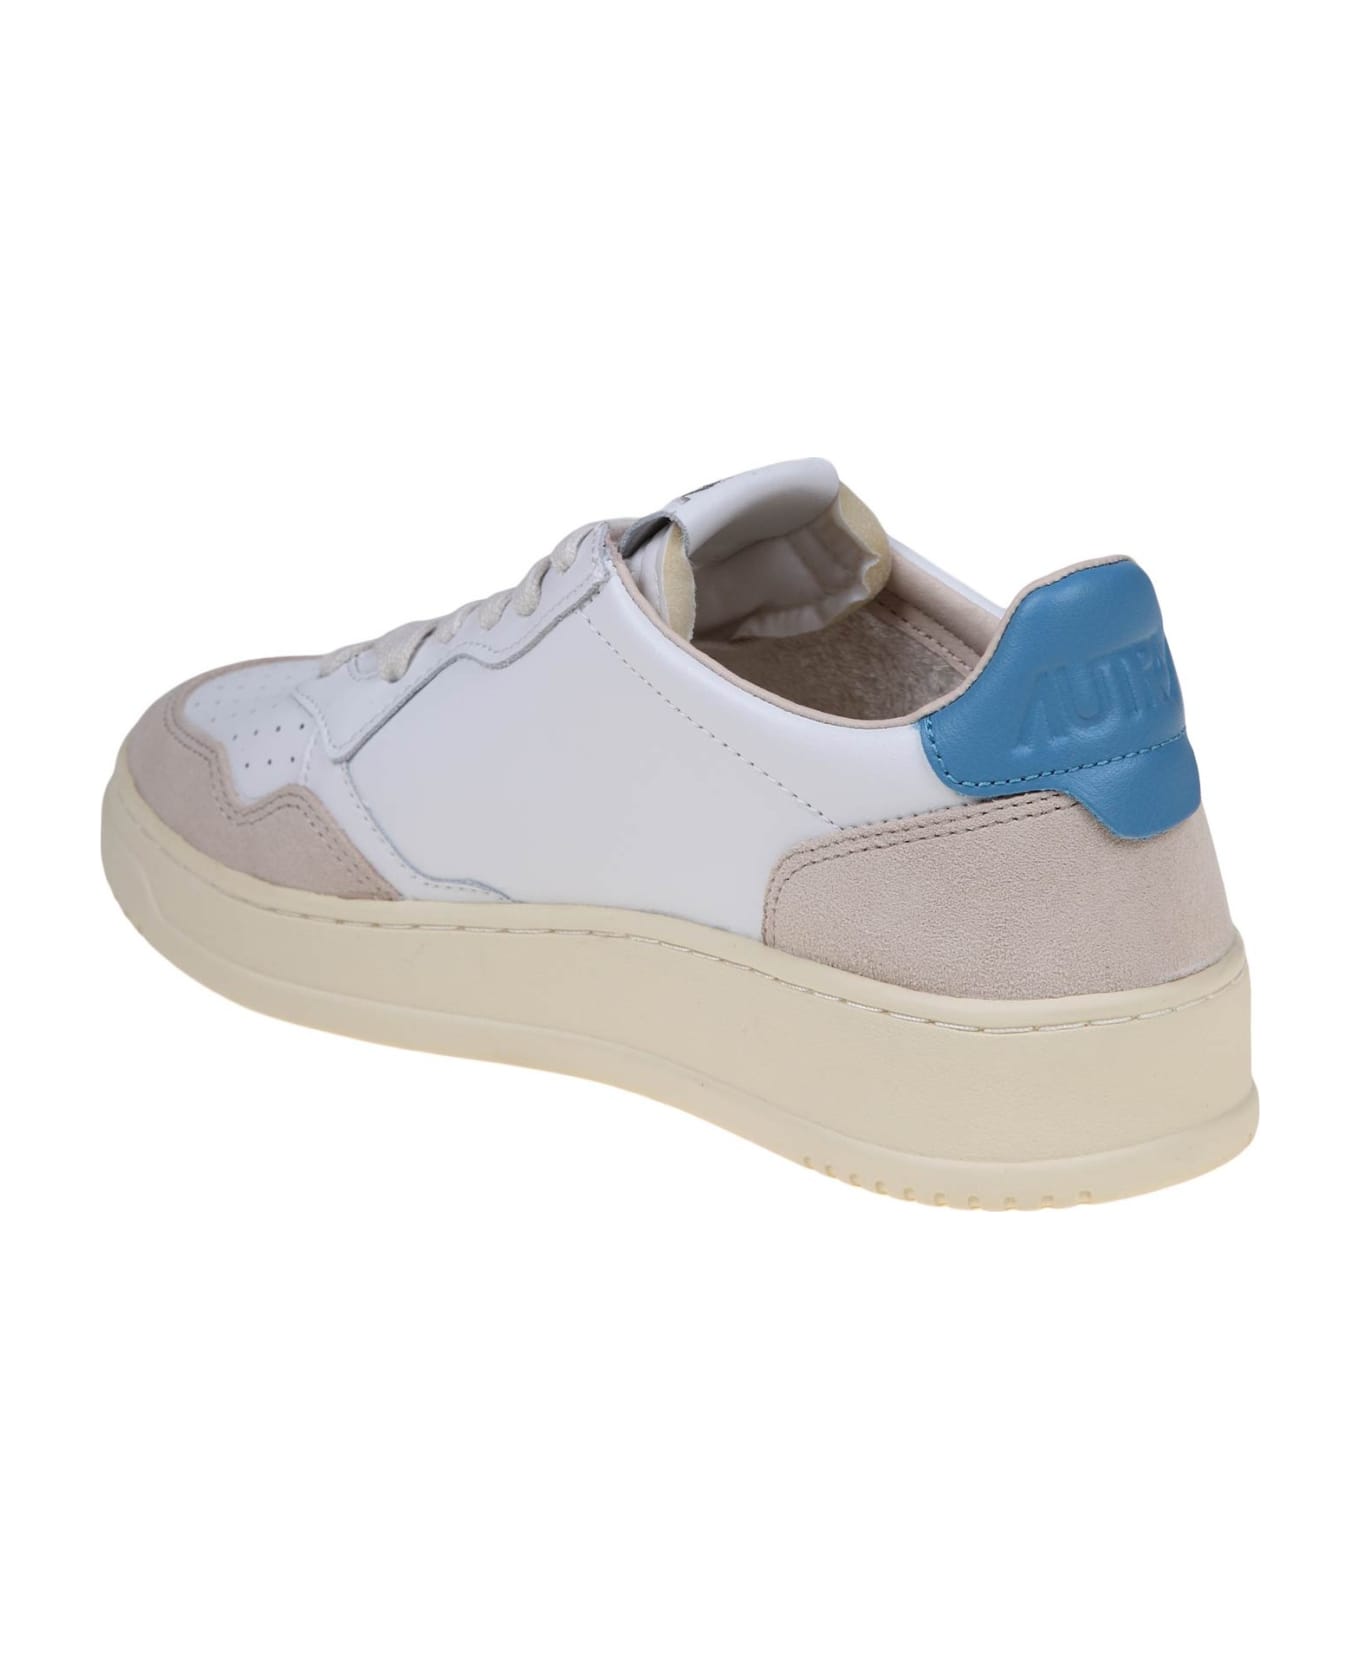 Autry Medalist Low Sneakers - white/blue